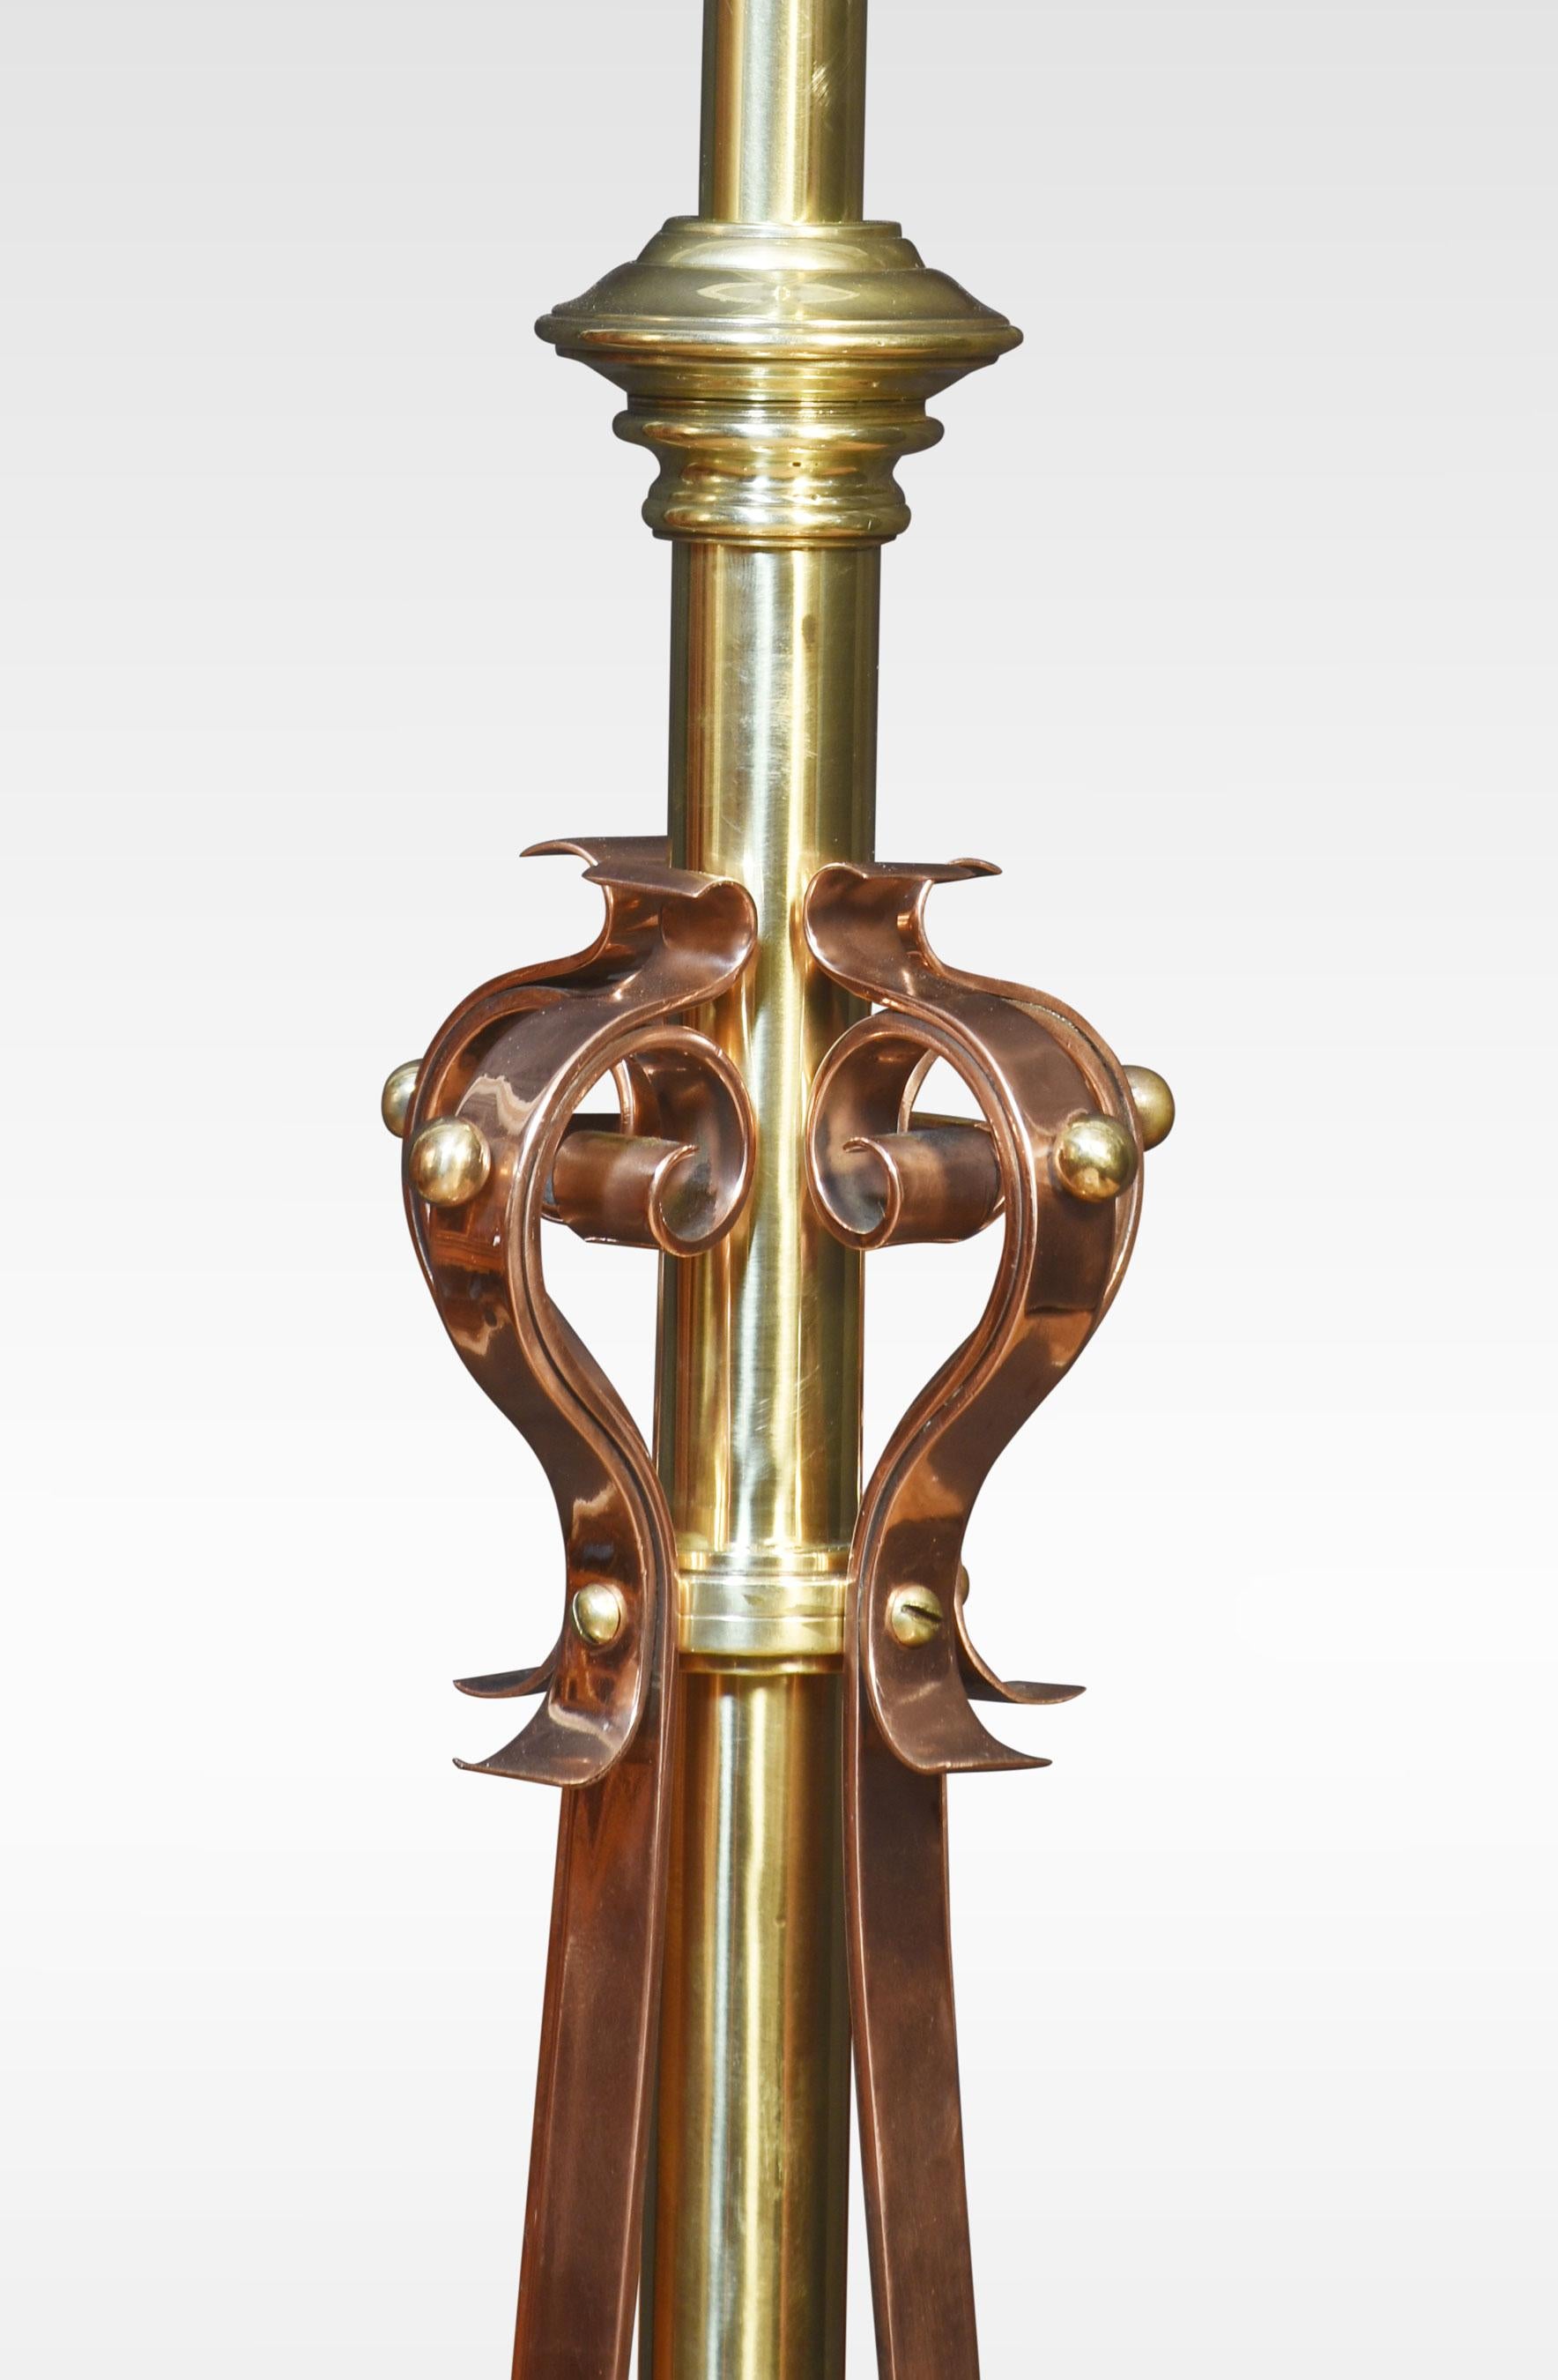 Brass and copper standard lamps The design attributed to W.A.S. Benson, with central brass column and four shaped legs terminating in paw feet. applied with copper strap work.
Dimensions
Height 73.5 inches
Width 19.5 inches
Depth 19.5 inches.